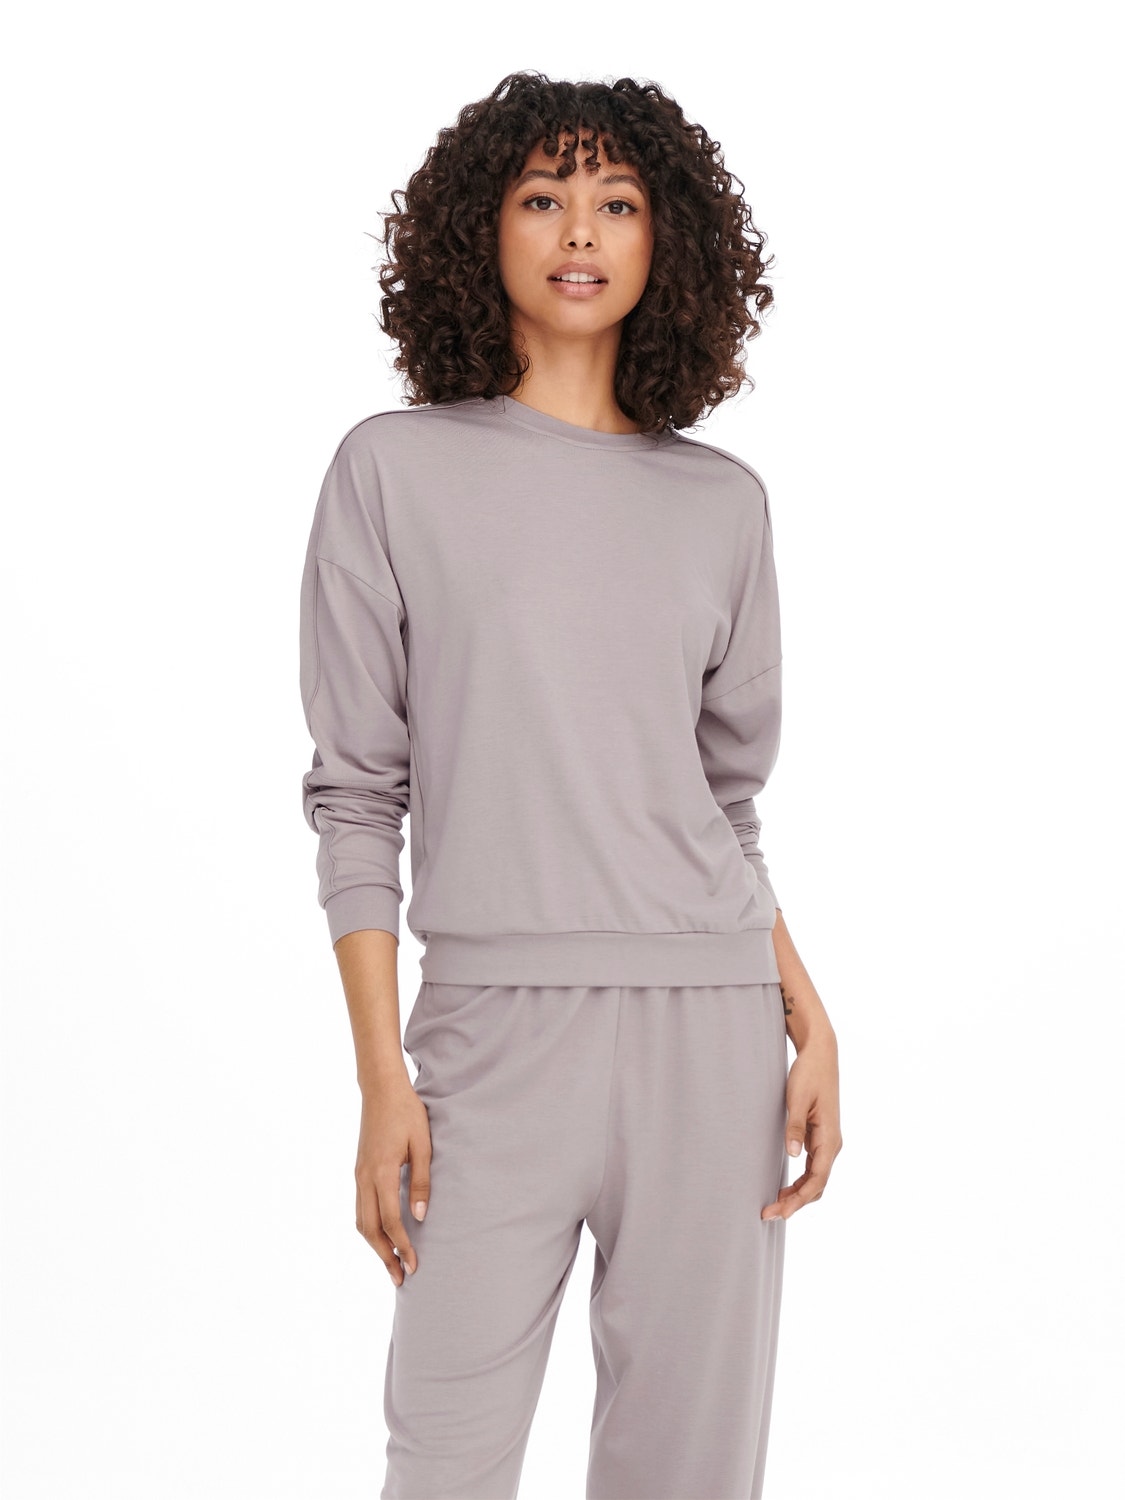 ONLY Long sleeved Training Top -Gull Gray - 15244742